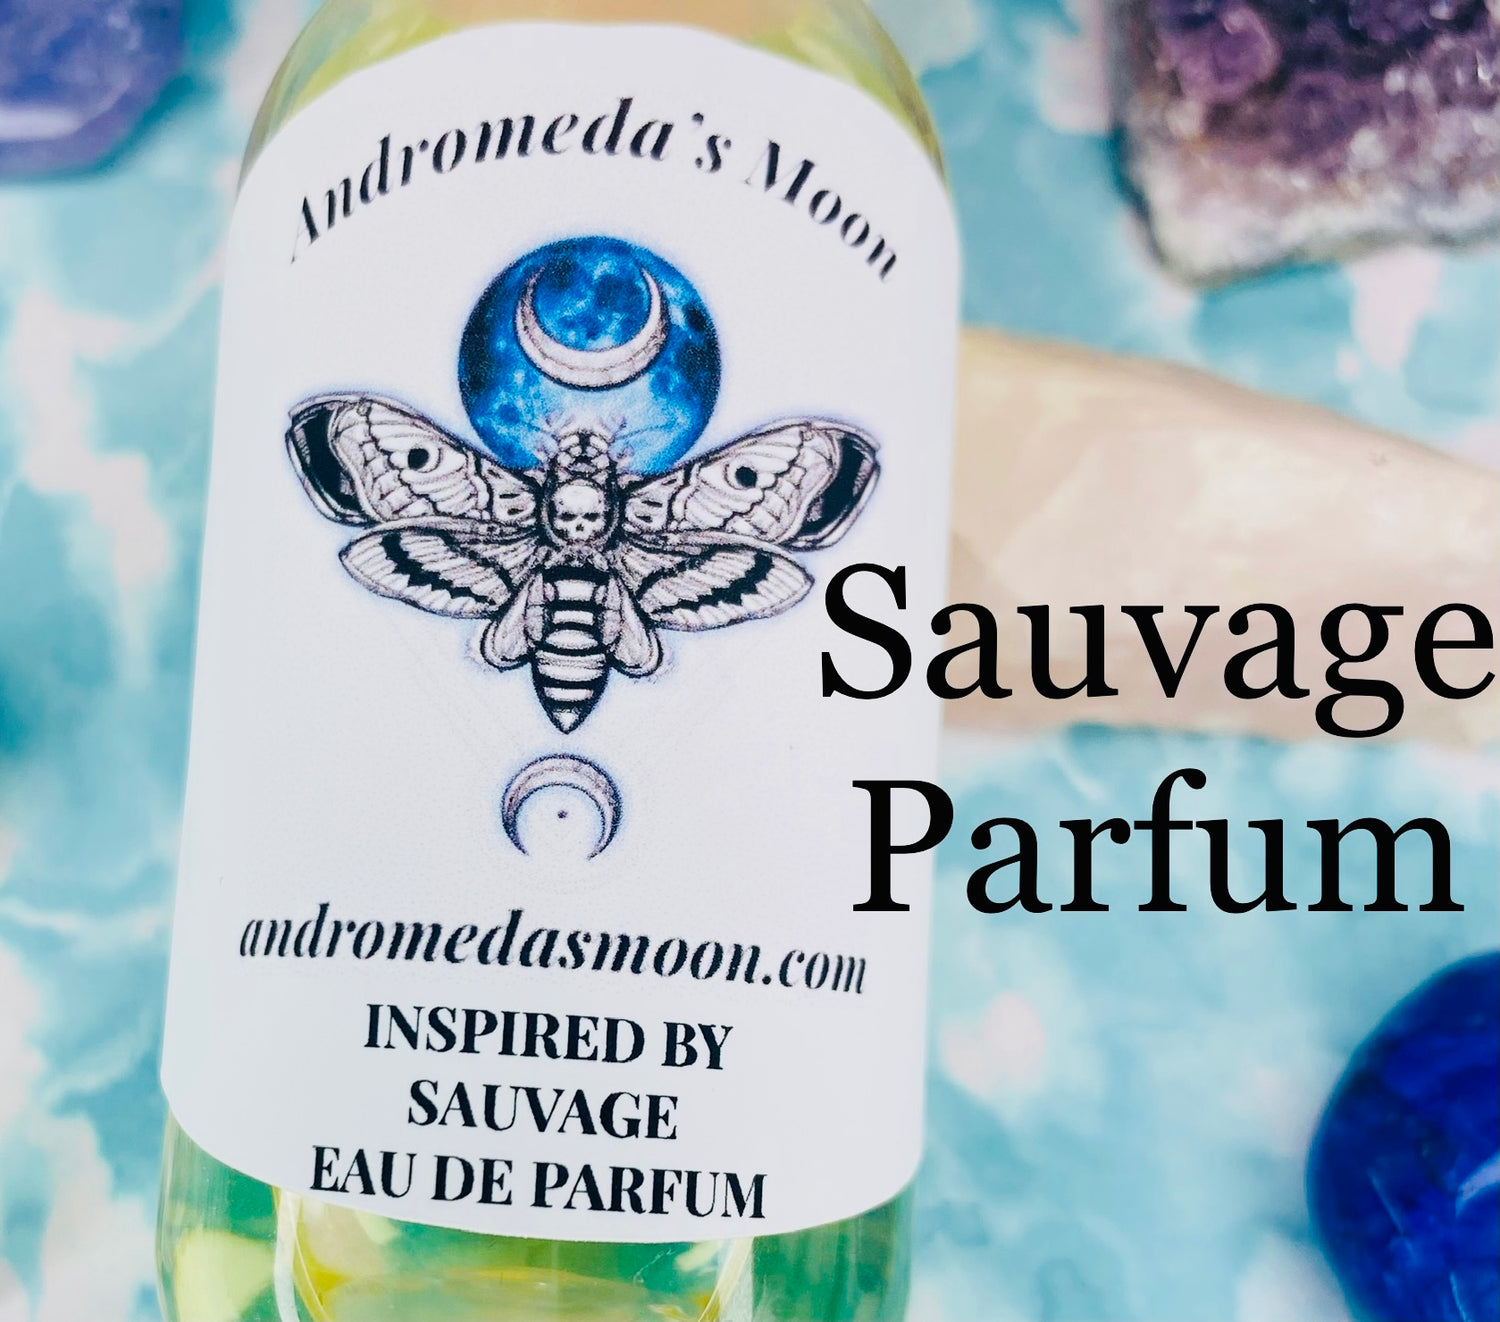 Inspired by Sauvage Parfum EDP – Andromeda's Moon